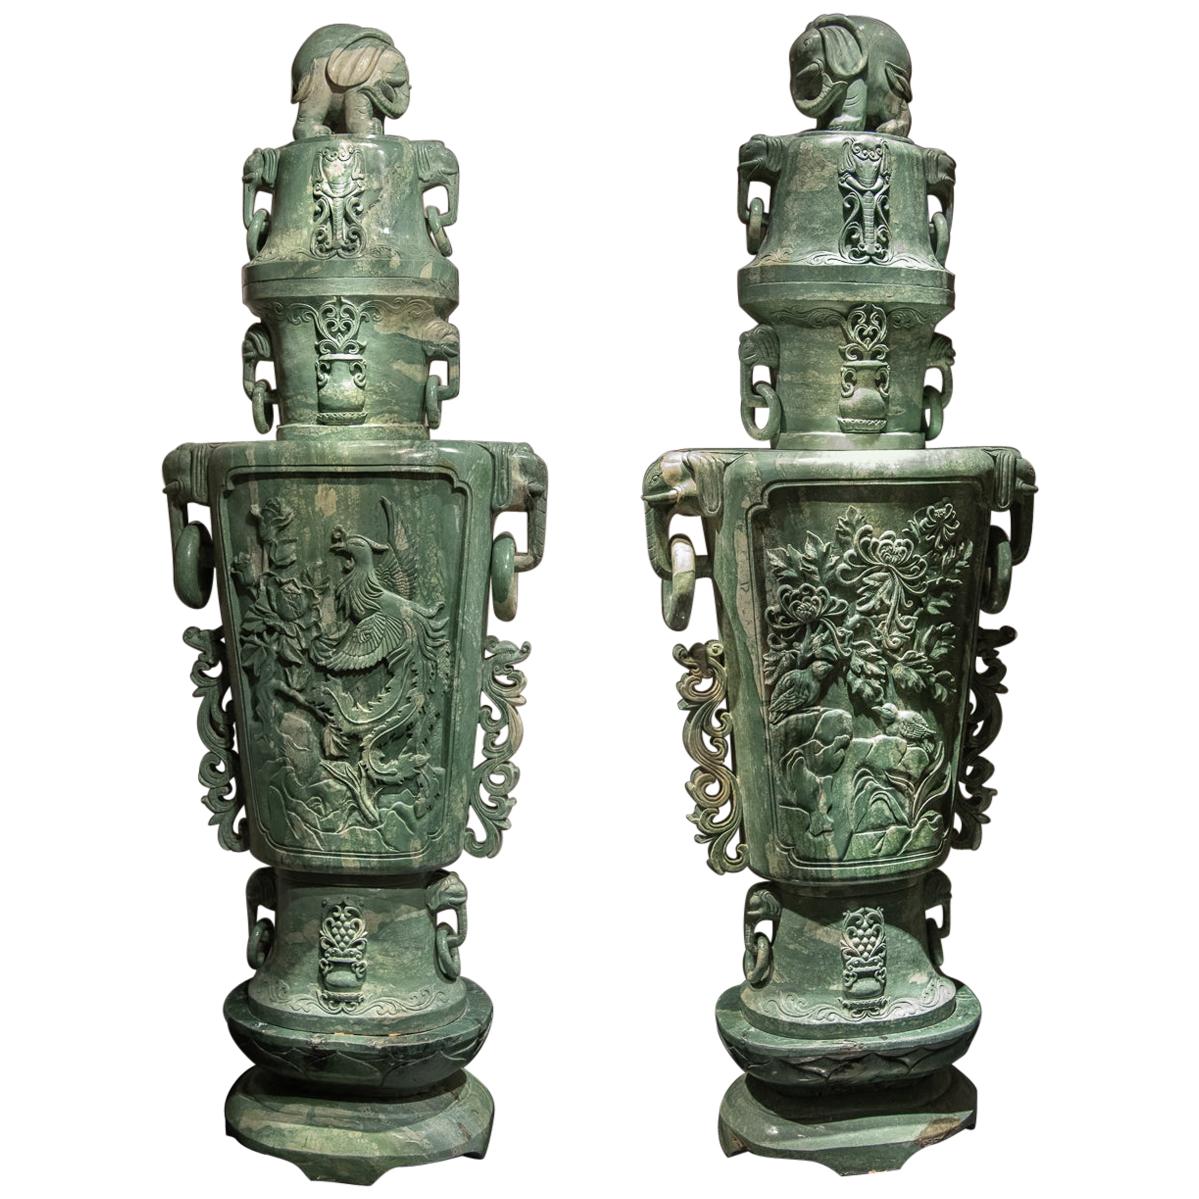 Extraordinary Pair of Massive Chinese Carved Serpentine Covered Vases